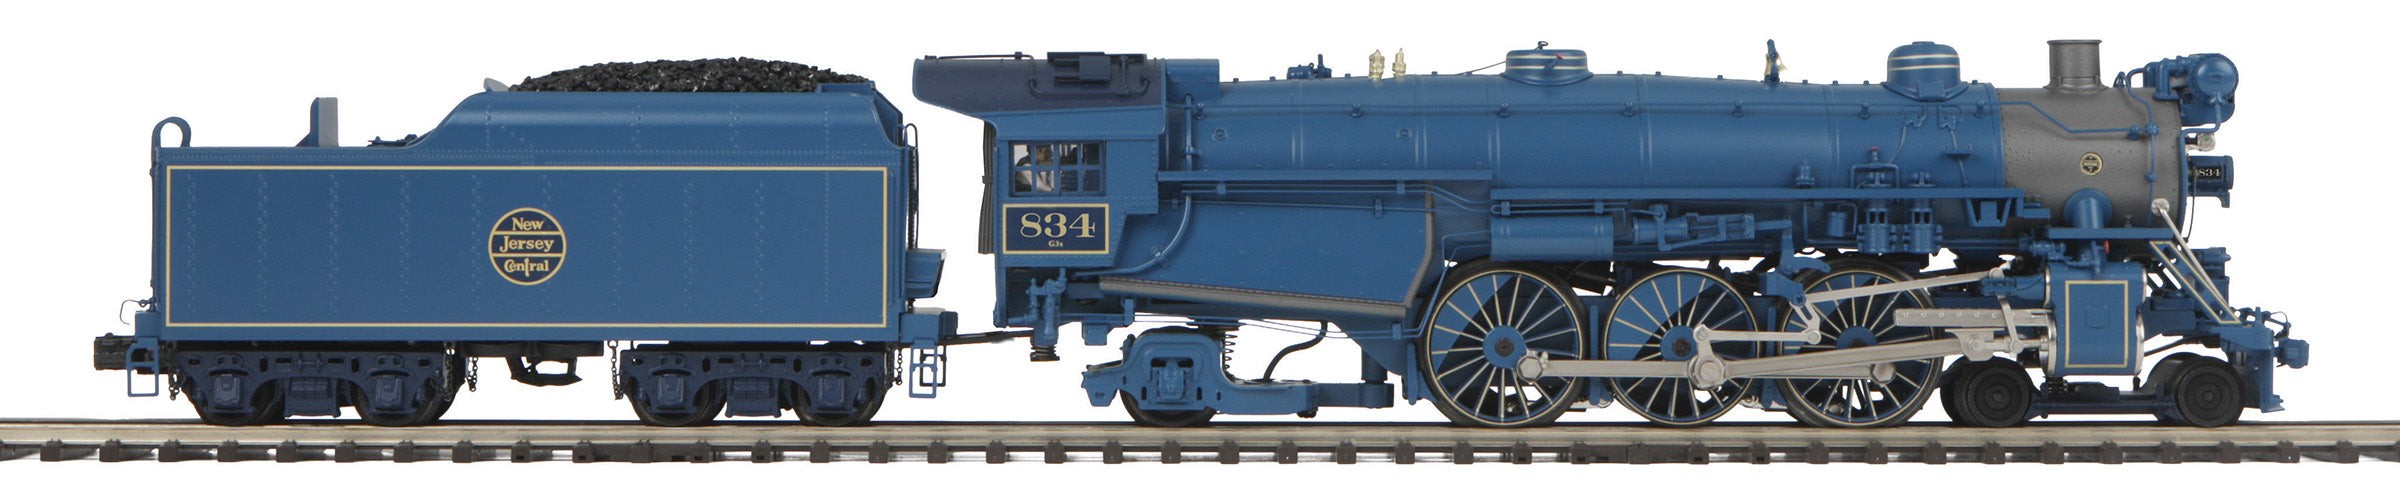 MTH 20-3922-1 - 4-6-2 P47 Baldwin Pacific Steam Engine "Jersey Central" #832 w/ PS3 (Blue Comet)